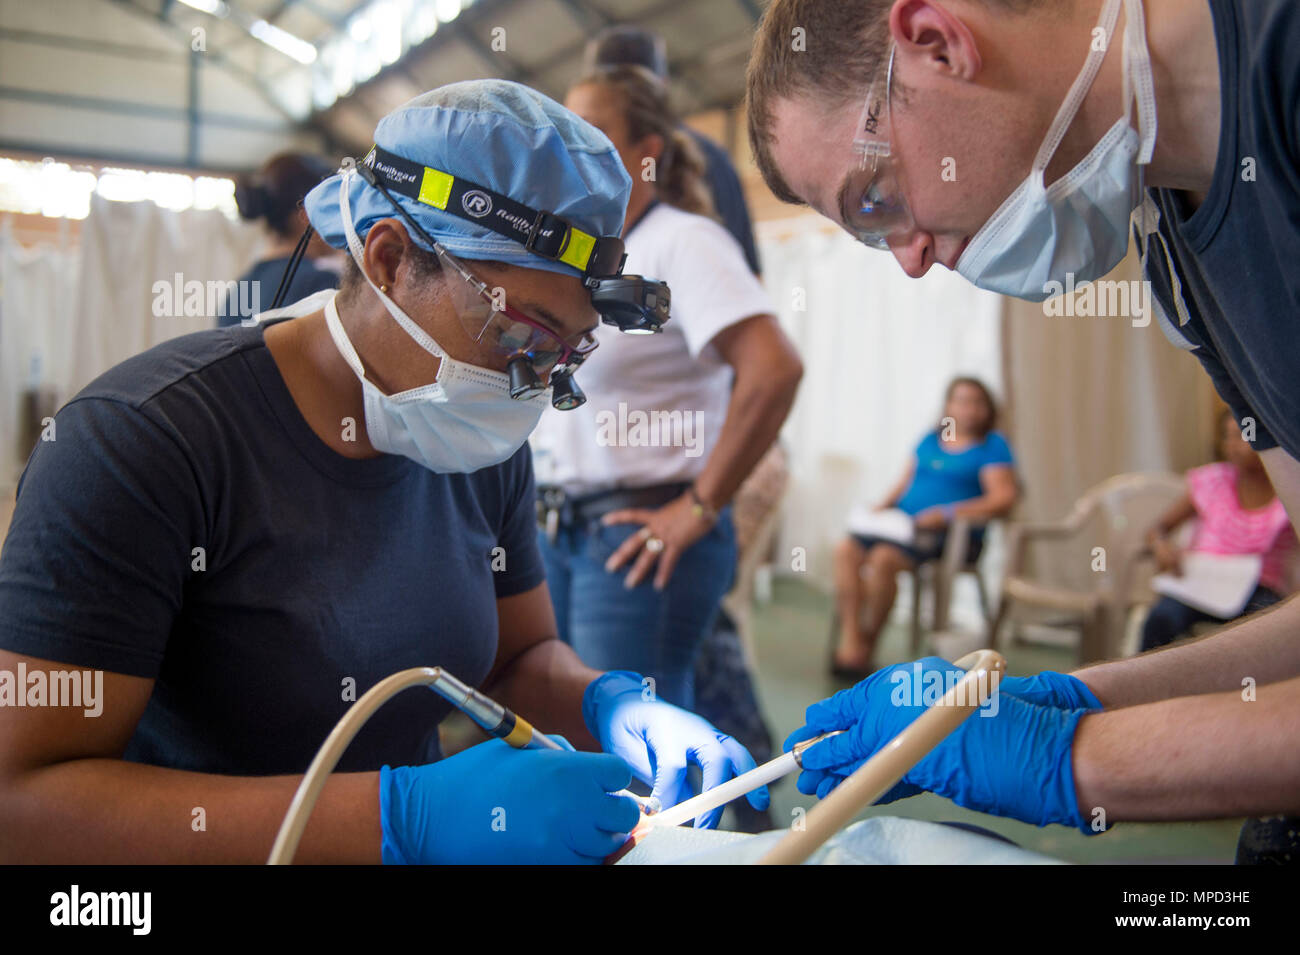 170203-N-YL073-193 (Feb. 3, 2017) PUERTO BARRIOS - Lt. Charlie Cage, a native of Jacksonville, Fla., attached to Naval Hospital Jacksonville (left), and Hospitalman Lucas Guinon, a native of Valeo, Calif., perform dental work on a host nation patient at the Continuing Promise 2017 (CP-17) medical site in Puerto Barrios, Guatemala. CP-17 is a U.S. Southern Command-sponsored and U.S. Naval Forces Southern Command/U.S. 4th Fleet-conducted deployment to conduct civil-military operations including humanitarian assistance, training engagements, and medical, dental, and veterinary support in an effor Stock Photo